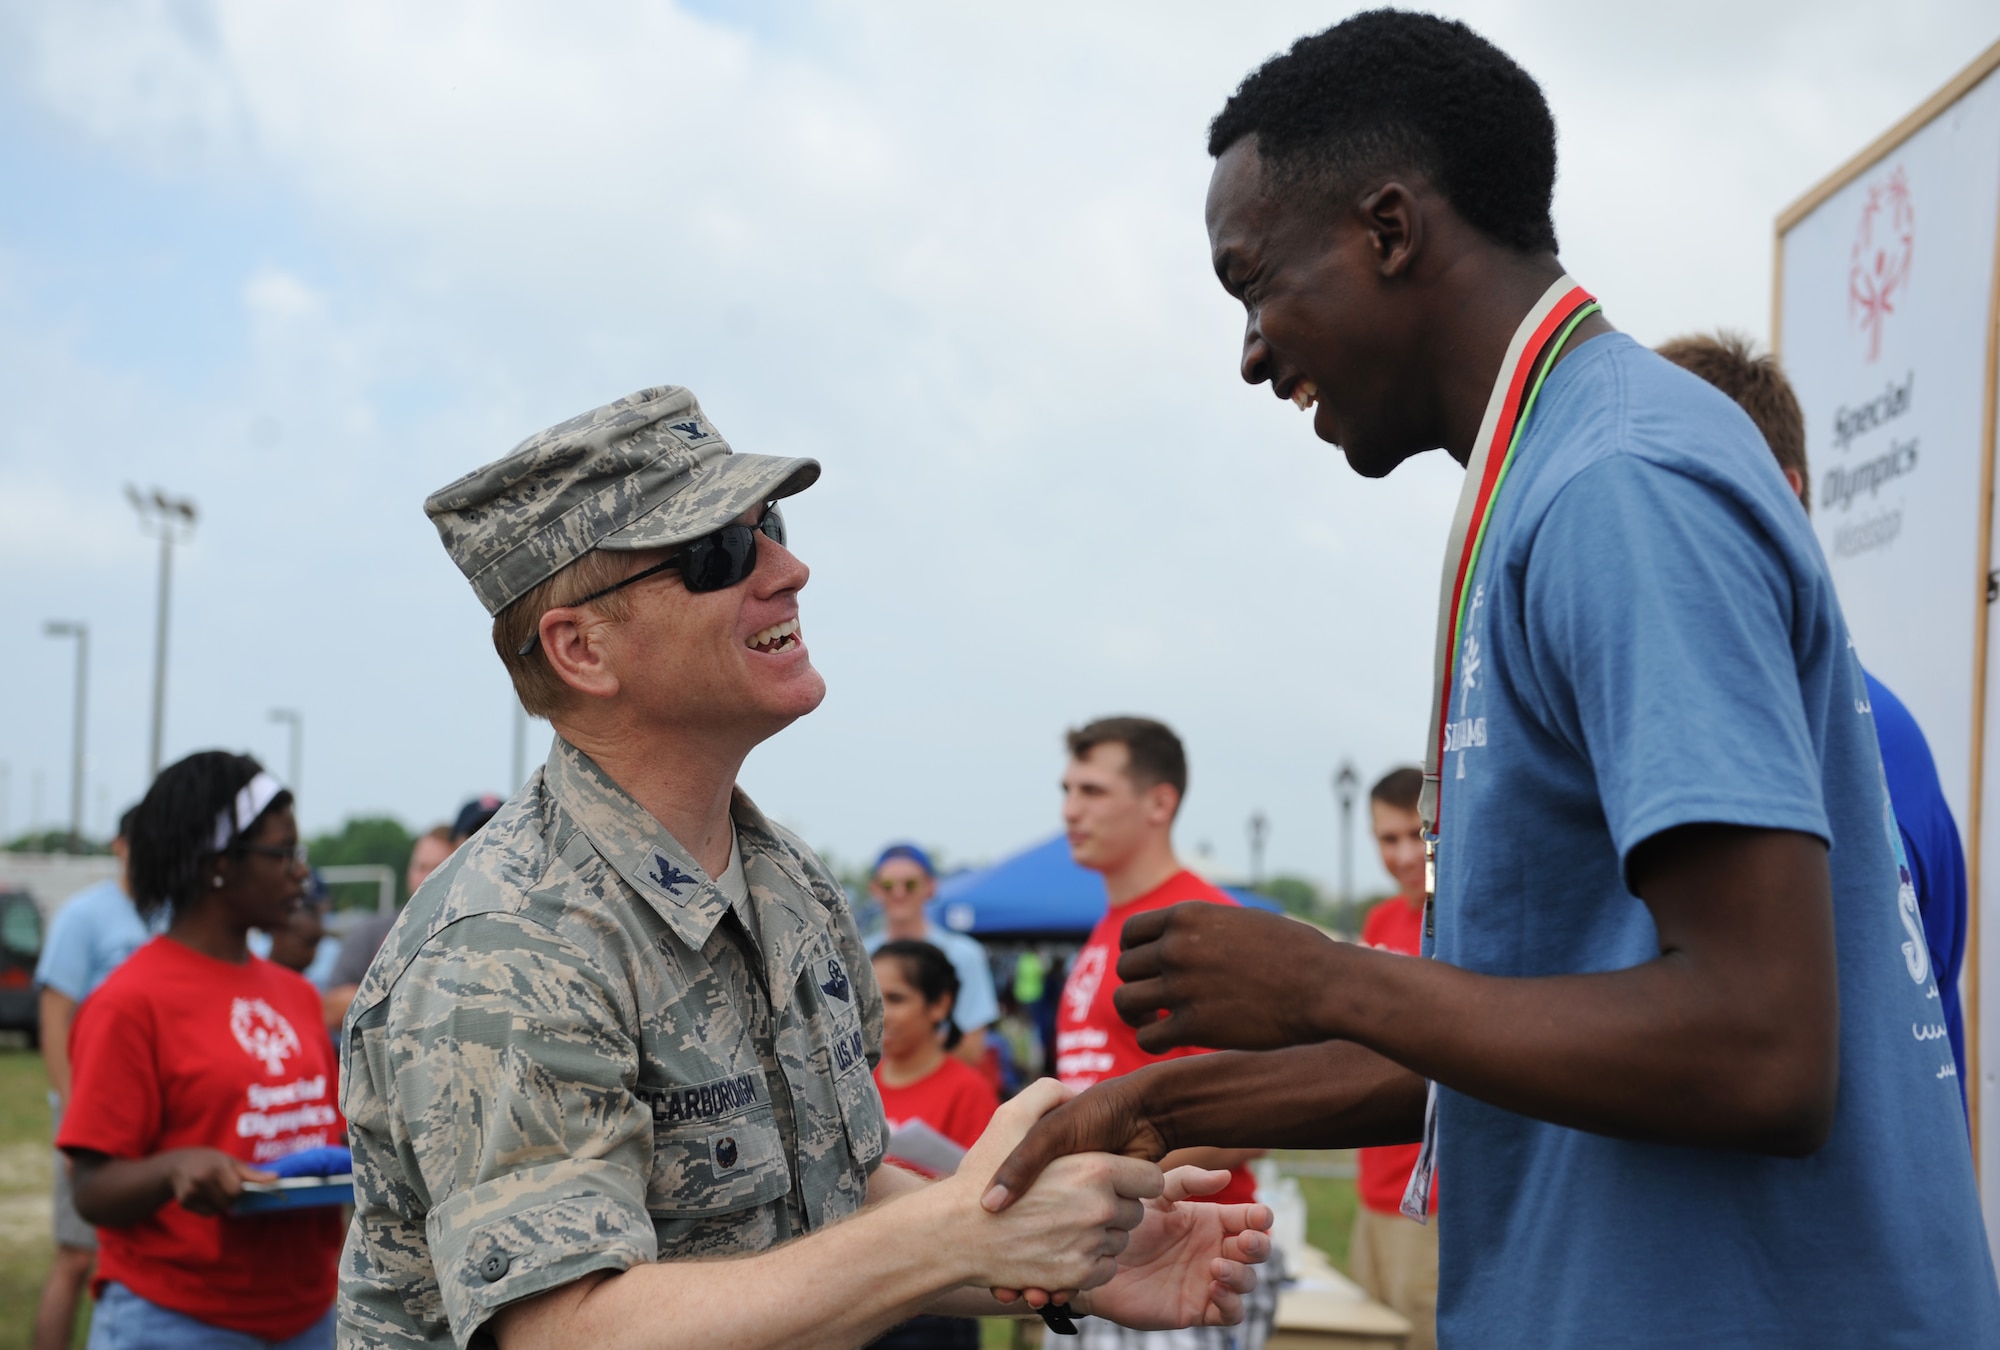 Col. Dennis Scarborough, 81st Training Wing vice commander, congratulates Desmond Brown, Special Olympics athlete, on earning a gold medal in the 50 meter race during the Special Olympics Mississippi Summer Games at the triangle track May 21, 2016, Keesler Air Force Base, Miss. More than 700 athletes and 3,000 volunteers worked together to hold competitions throughout the day. This is the 30th year Keesler has hosted the state Special Olympics.  (U.S. Air Force photo by Kemberly Groue)